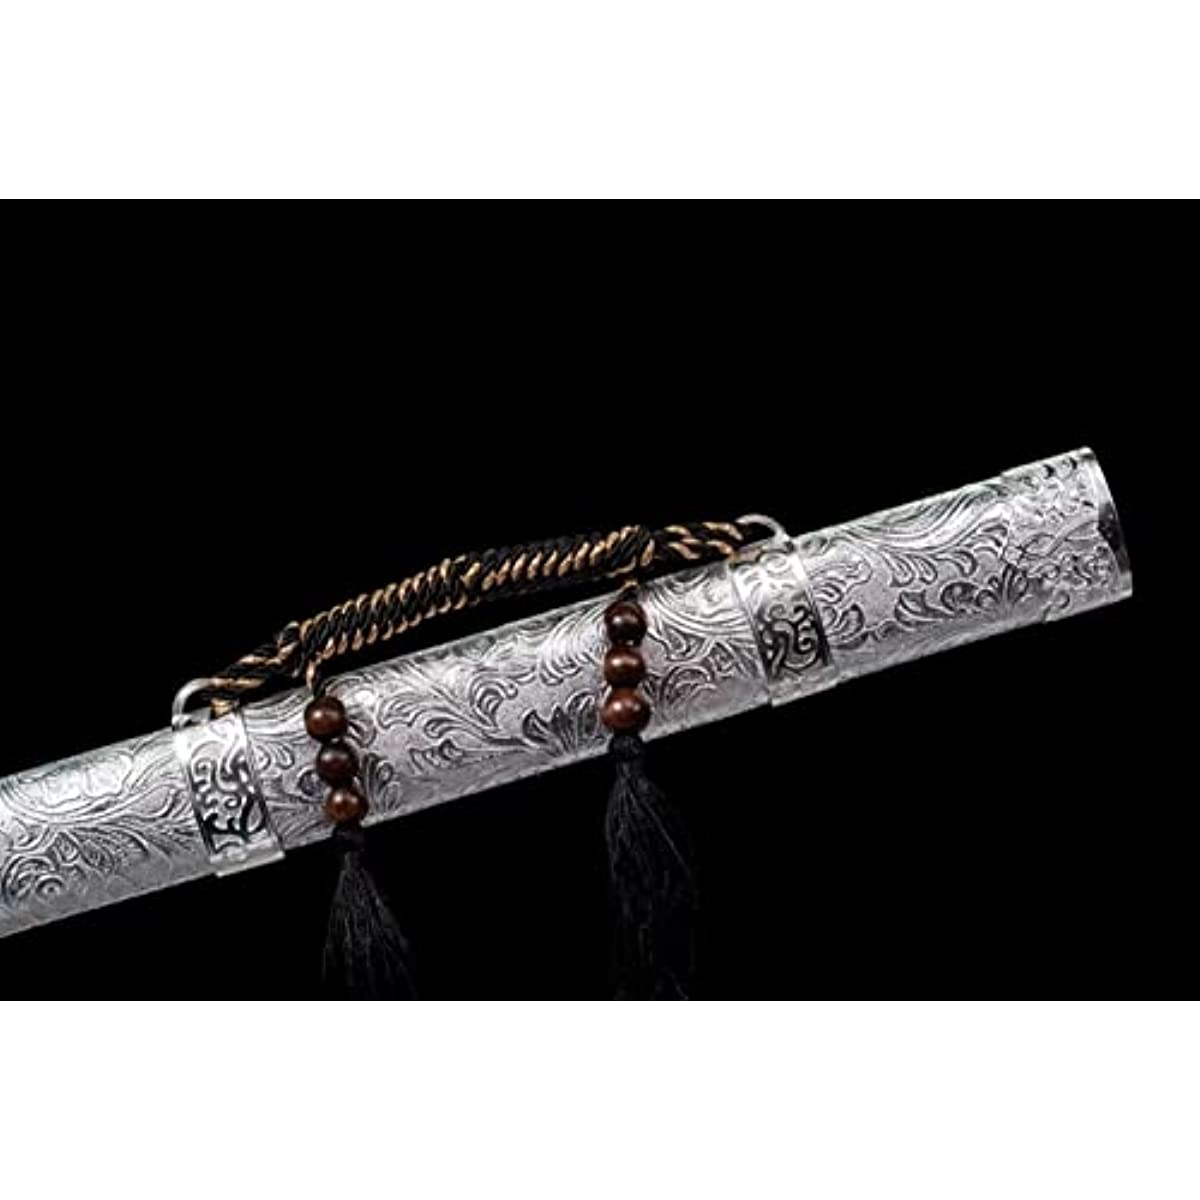 LOONGSWORD,Black Gold Swords High Carbon Steel Color Blade,Alloy Fittings,Silver PU Scabbard